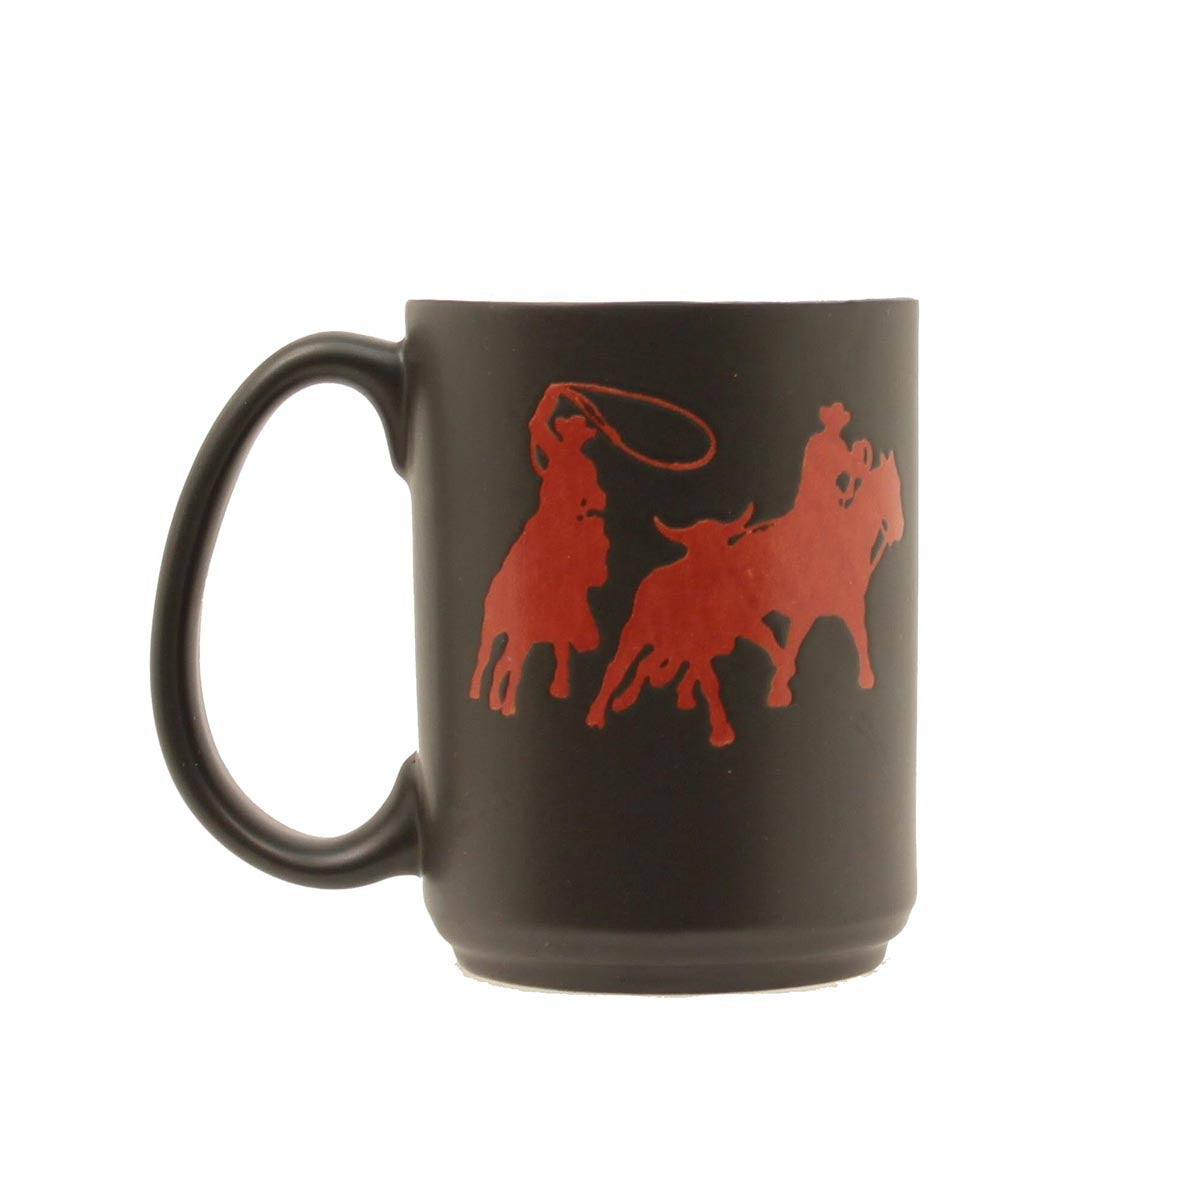 Western Moments Coffee Mug - Black with Red Team Roper